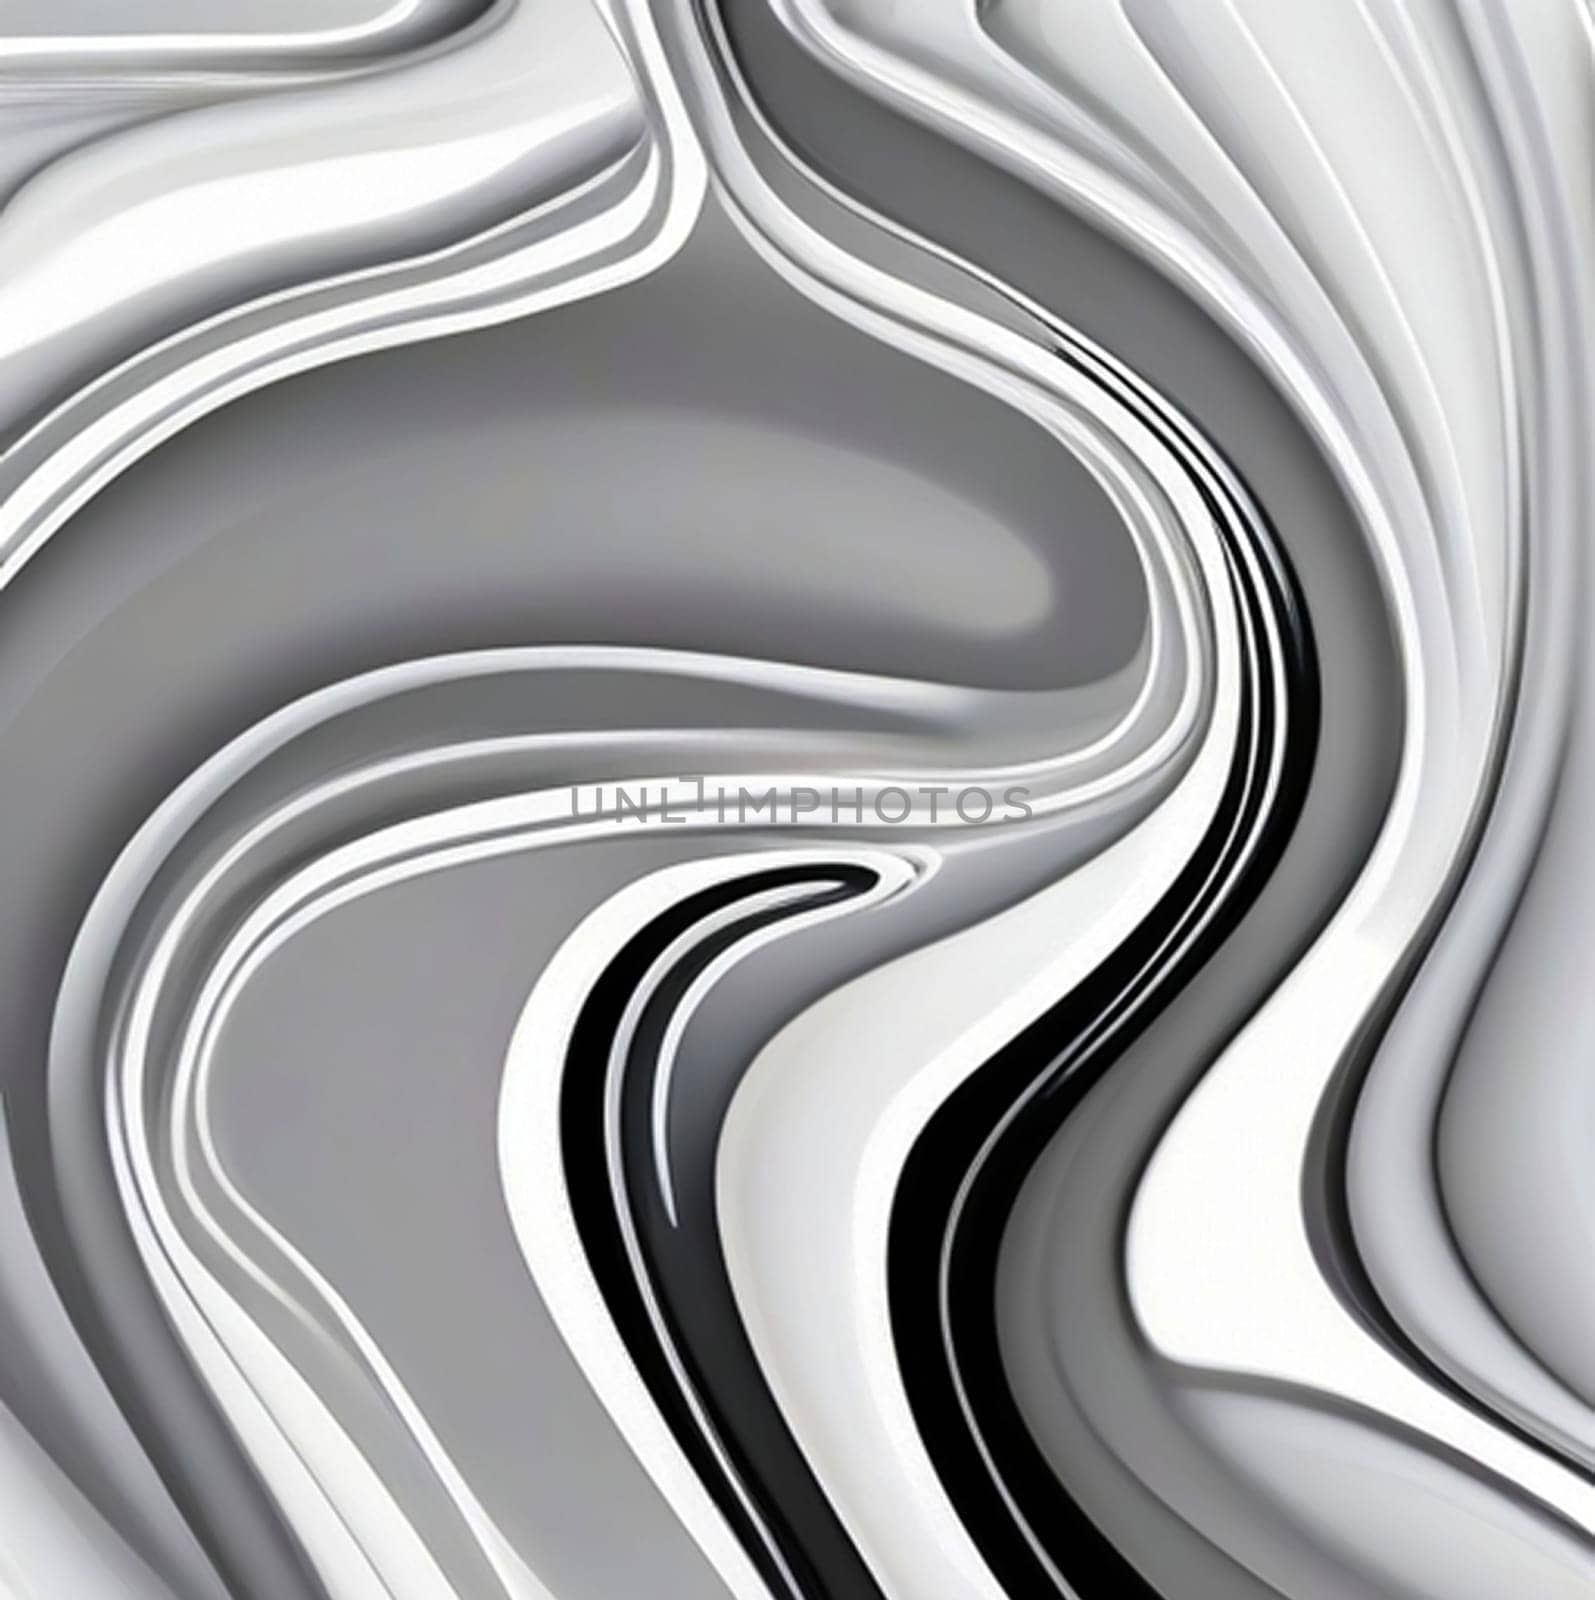 White and black artistic abstract swirl background by antoksena